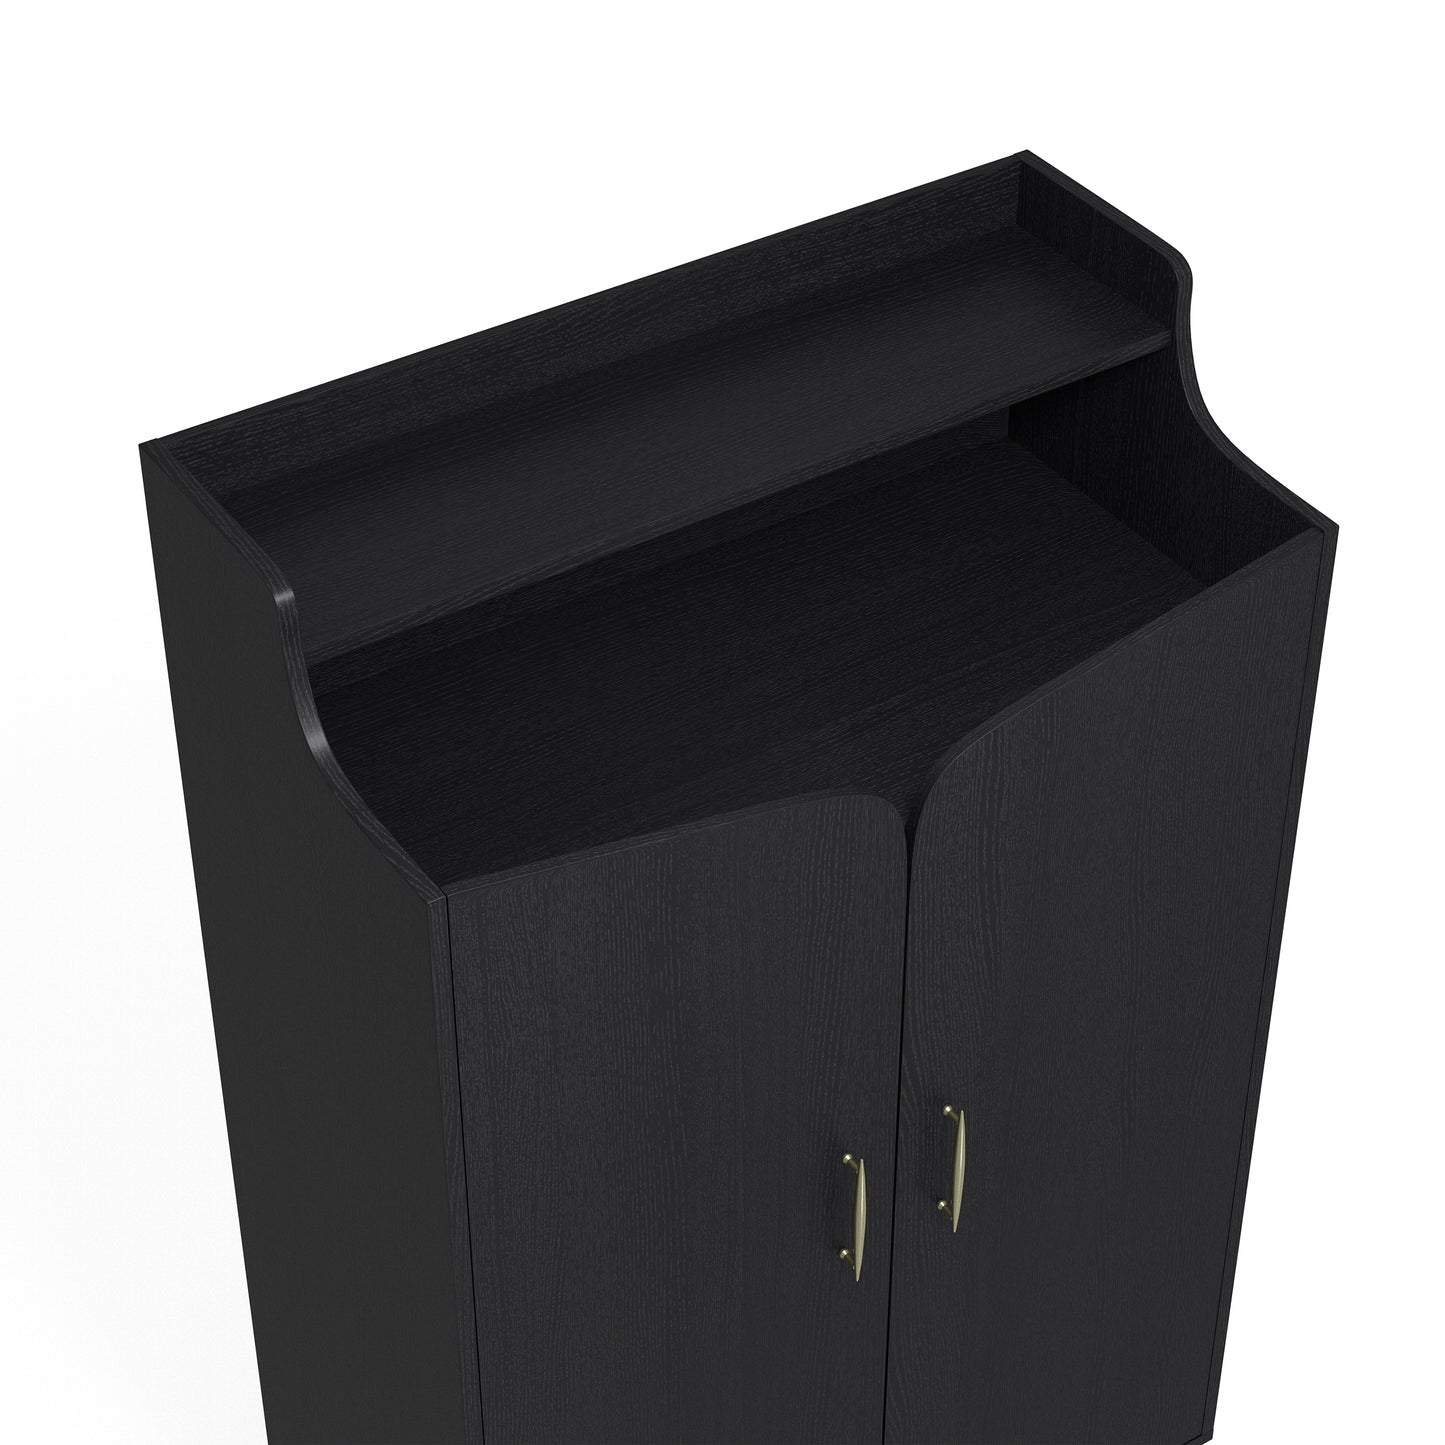 Right angled bird's eye view of a transitional black and gold two-door 14-pair shoe cabinet with doors open on a white background